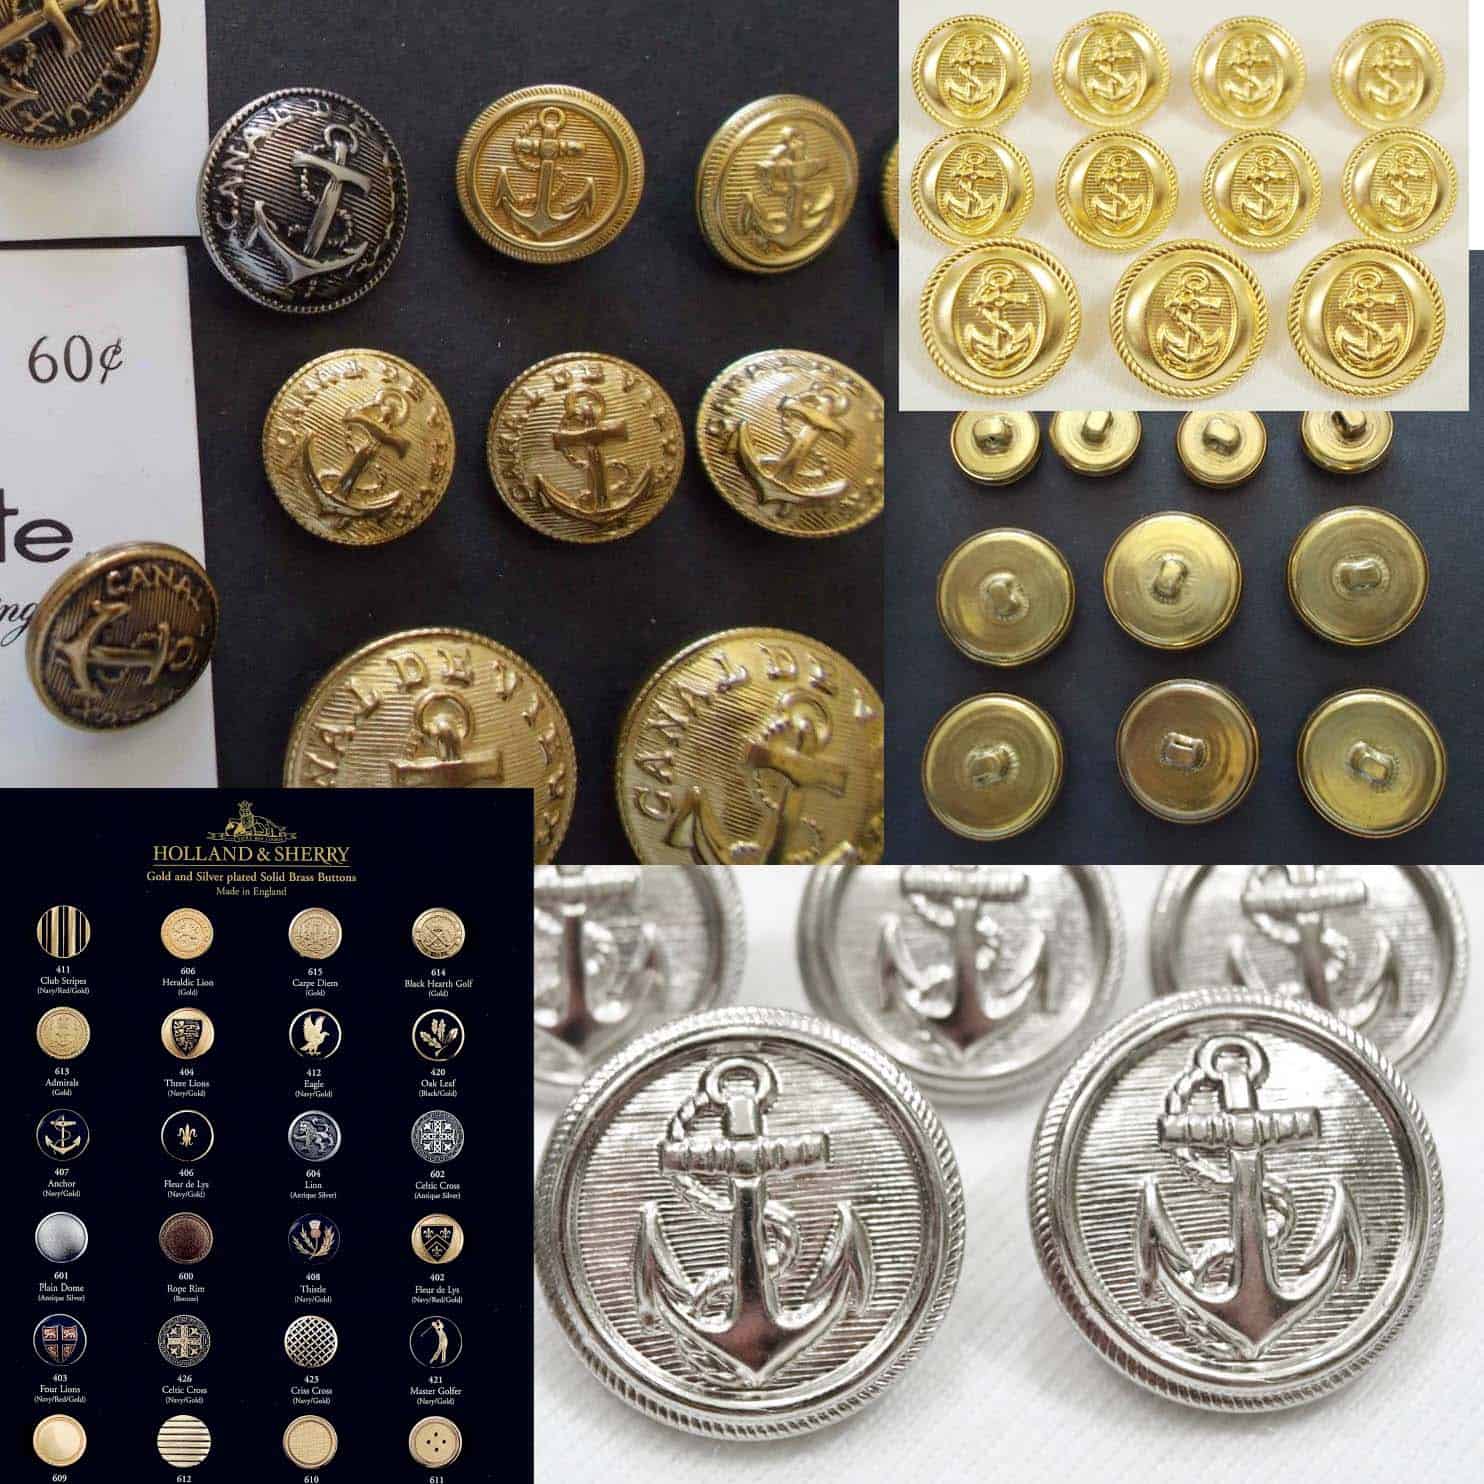 Blazer buttons in gold, silver, gilt or enamel with crests, anchor & heraldry